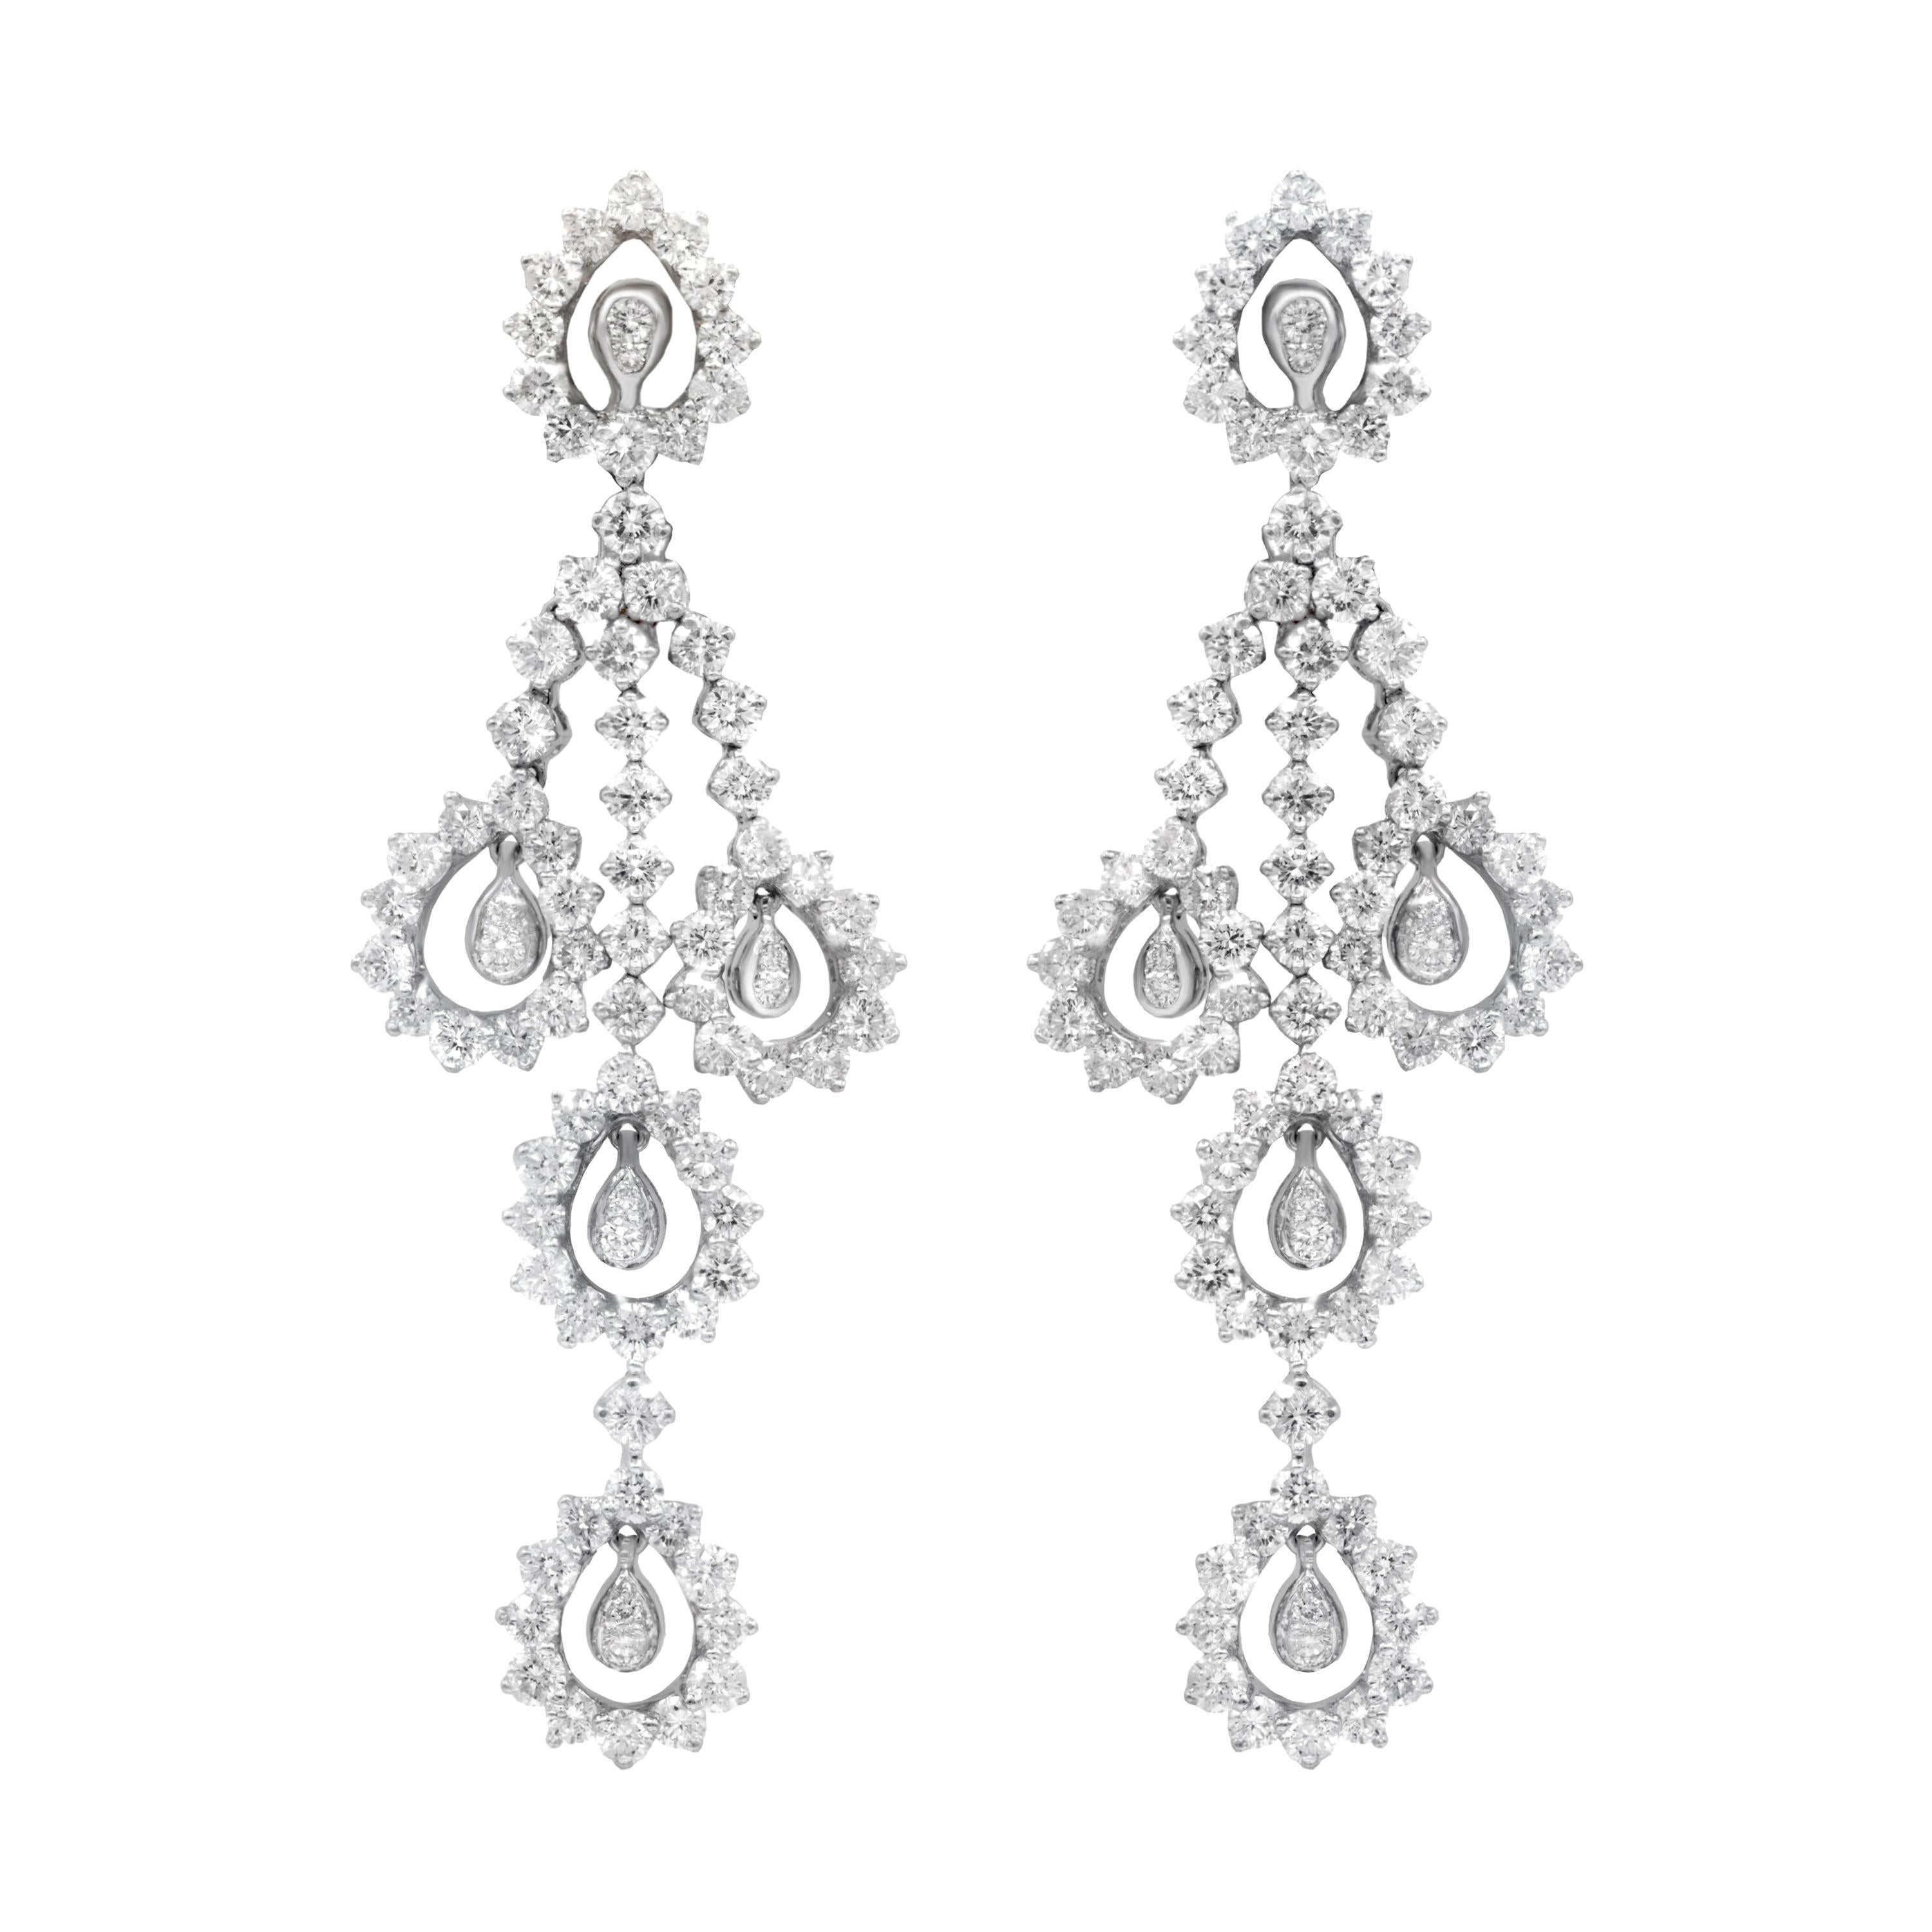 18kt Diamond Earrings Hanging Match for 'Dnk1362' 5.50ct Total Weight For Sale